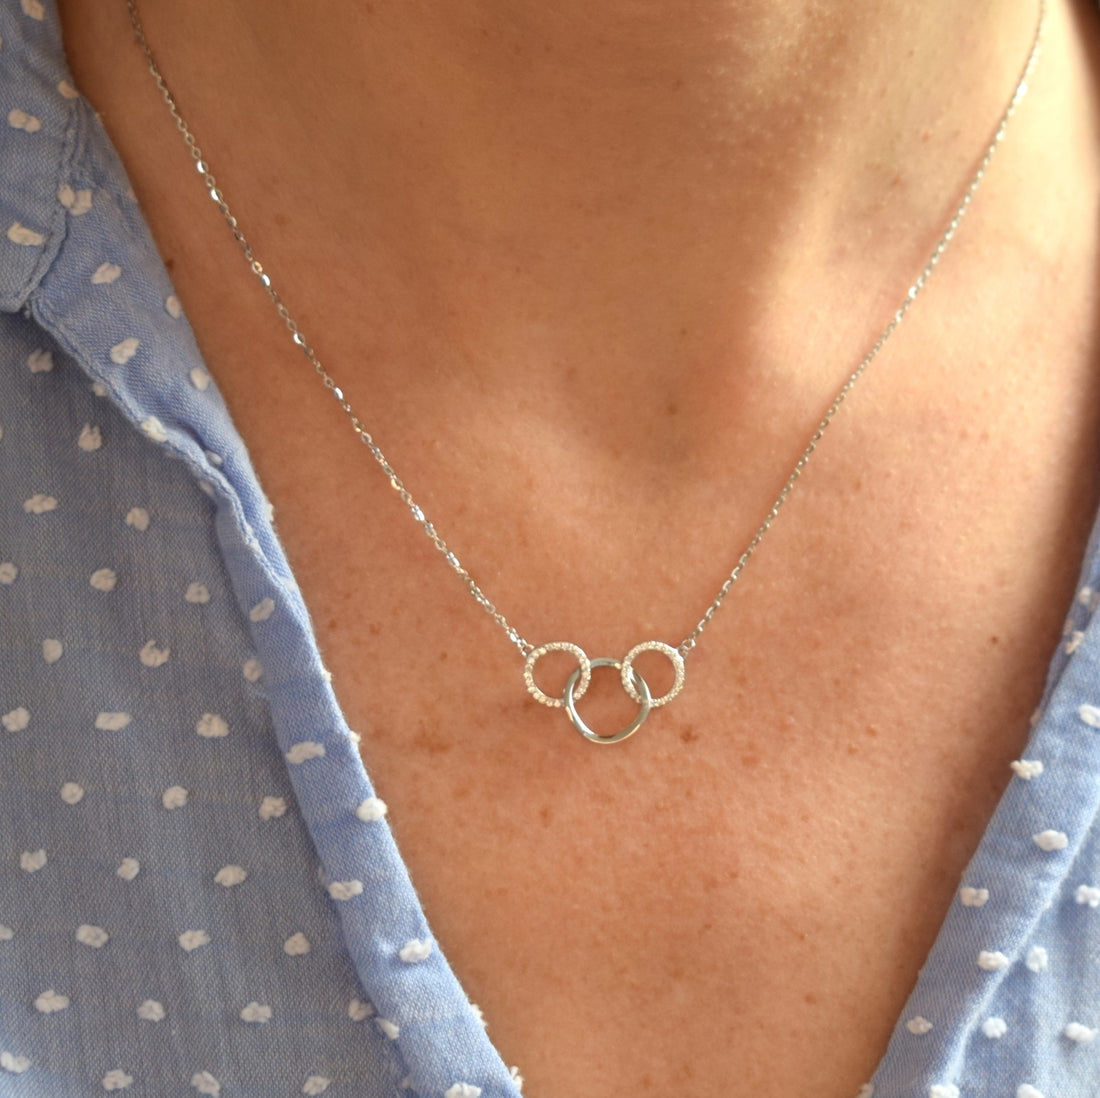 3 Rings for 3 Generations Ring Necklace